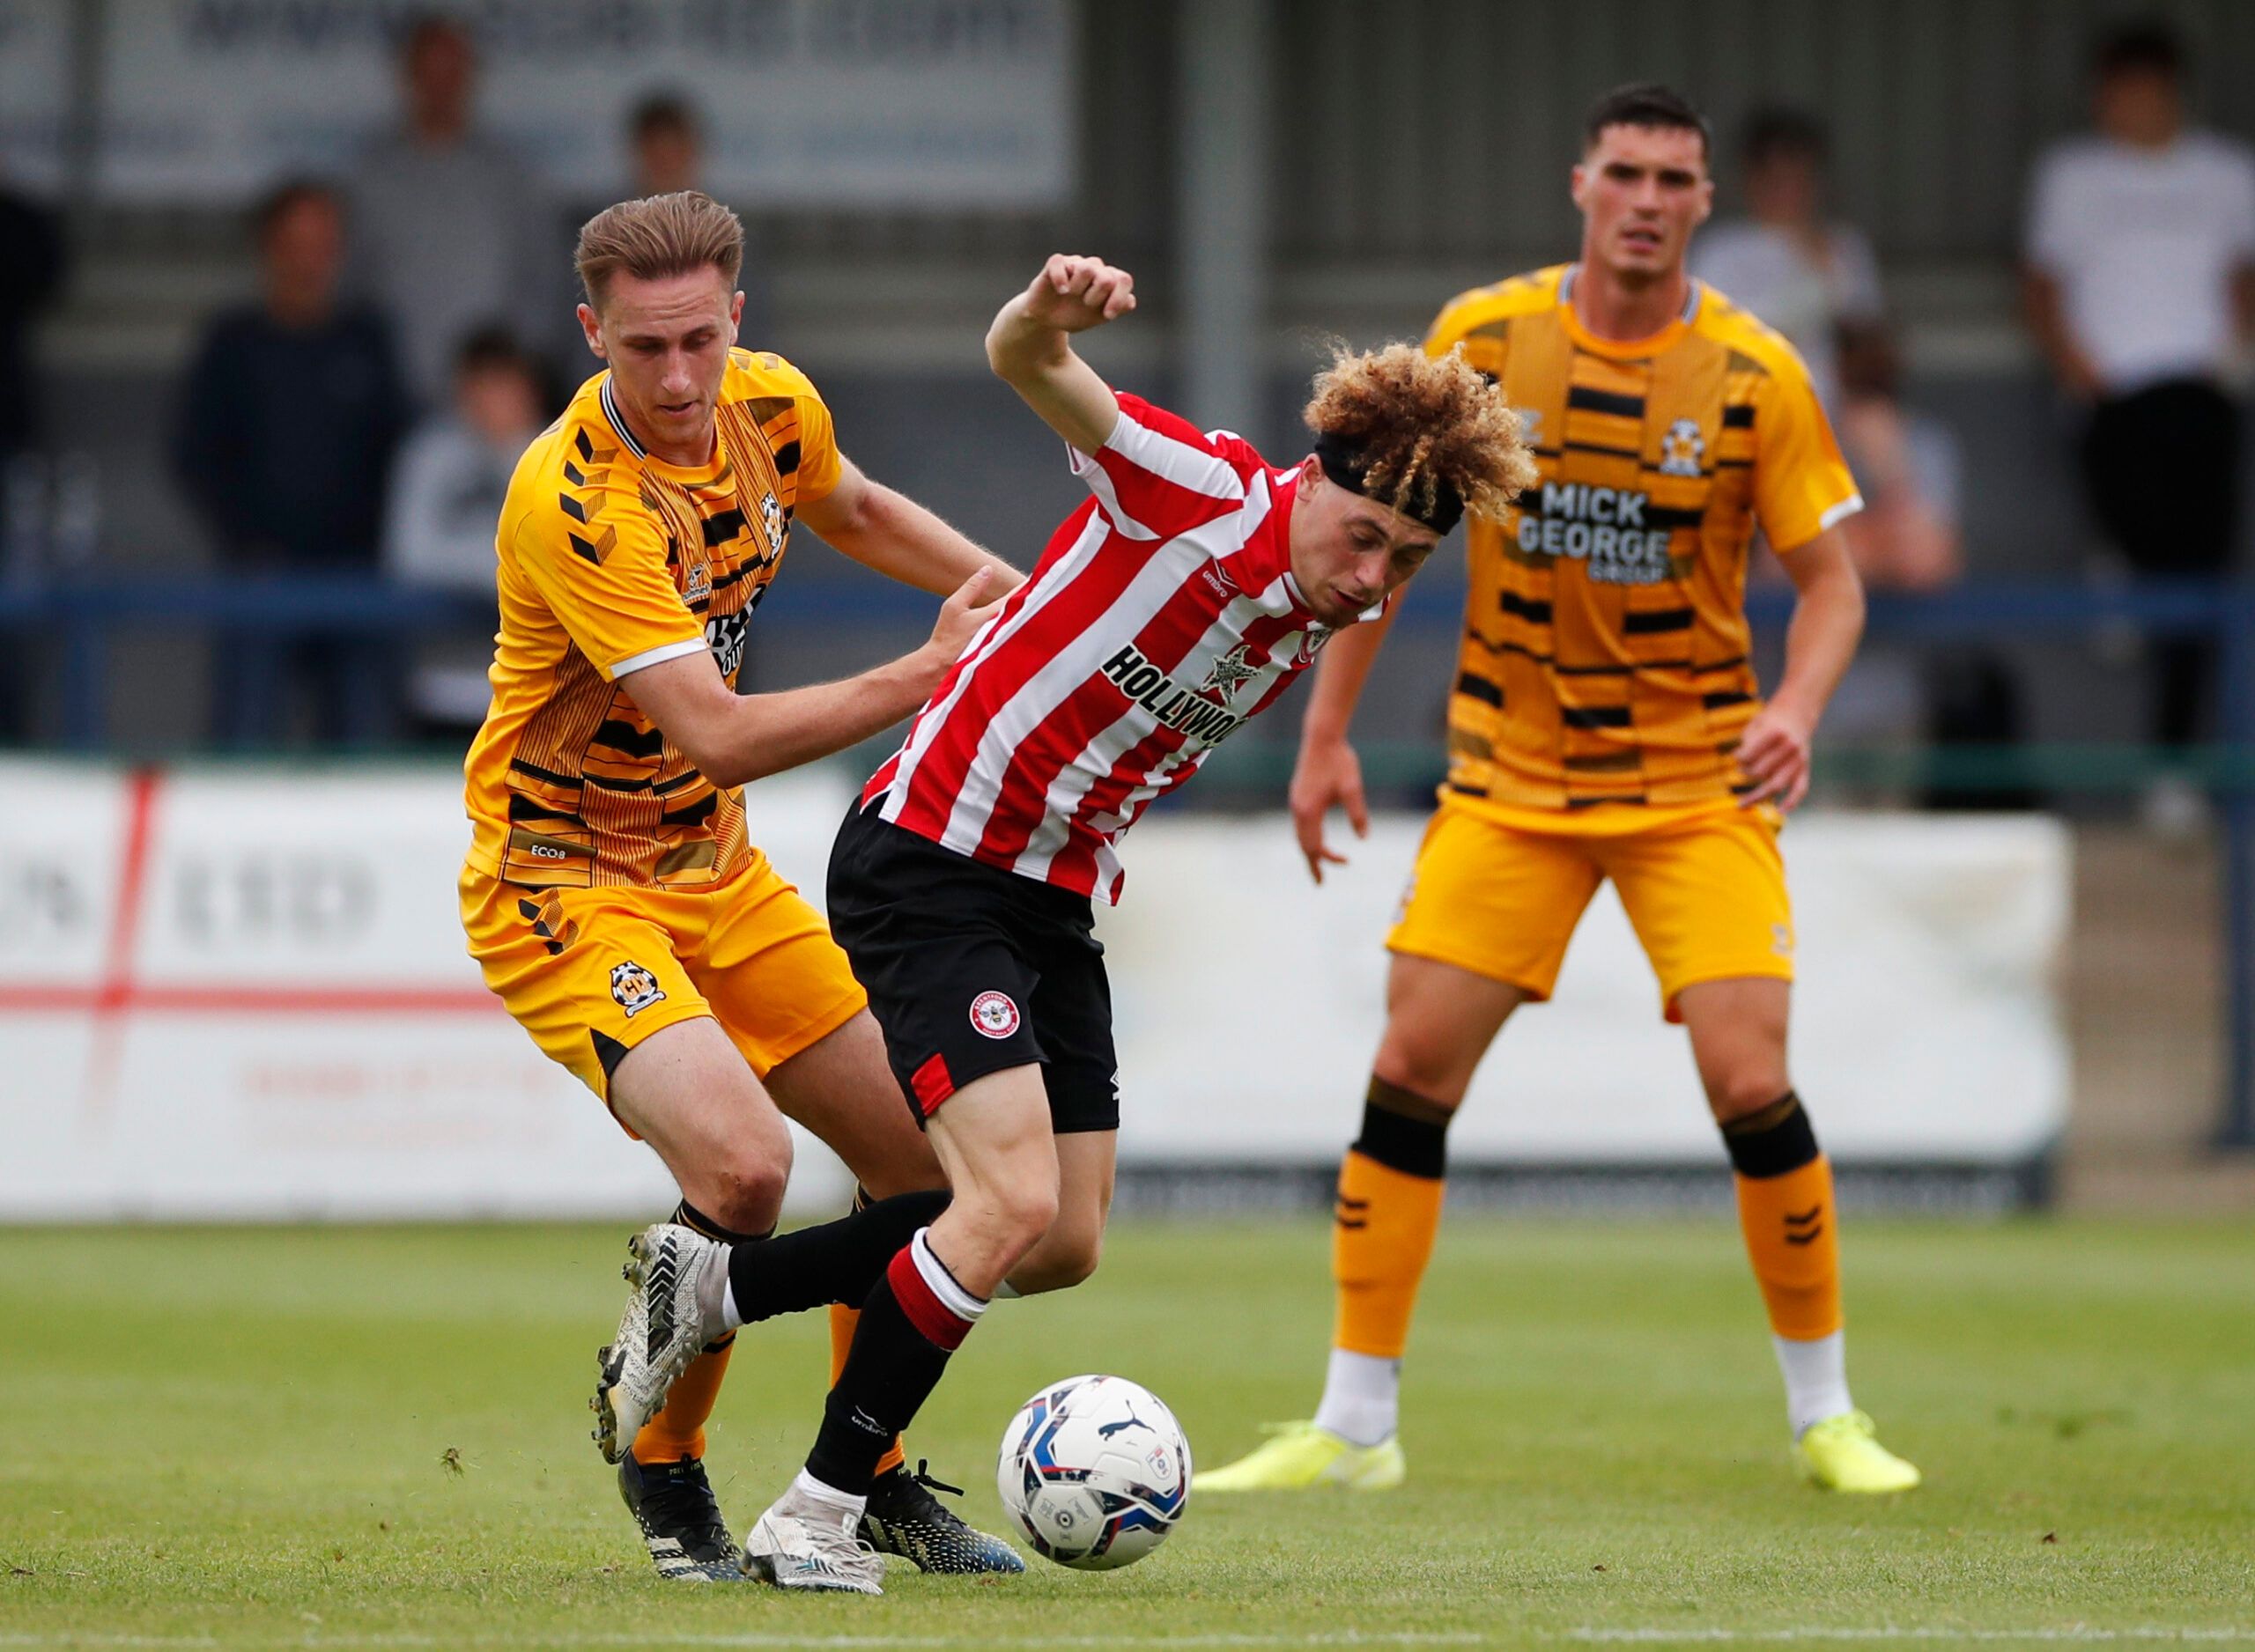 Soccer Football - Pre Season Friendly - Cambridge United v Brentford - Abbey Stadium, Cambridge, Britain - July 23, 2021  Brentford's Nathan Young-Coombes in action with Cambridge United's Adam May Action Images via Reuters/Paul Childs